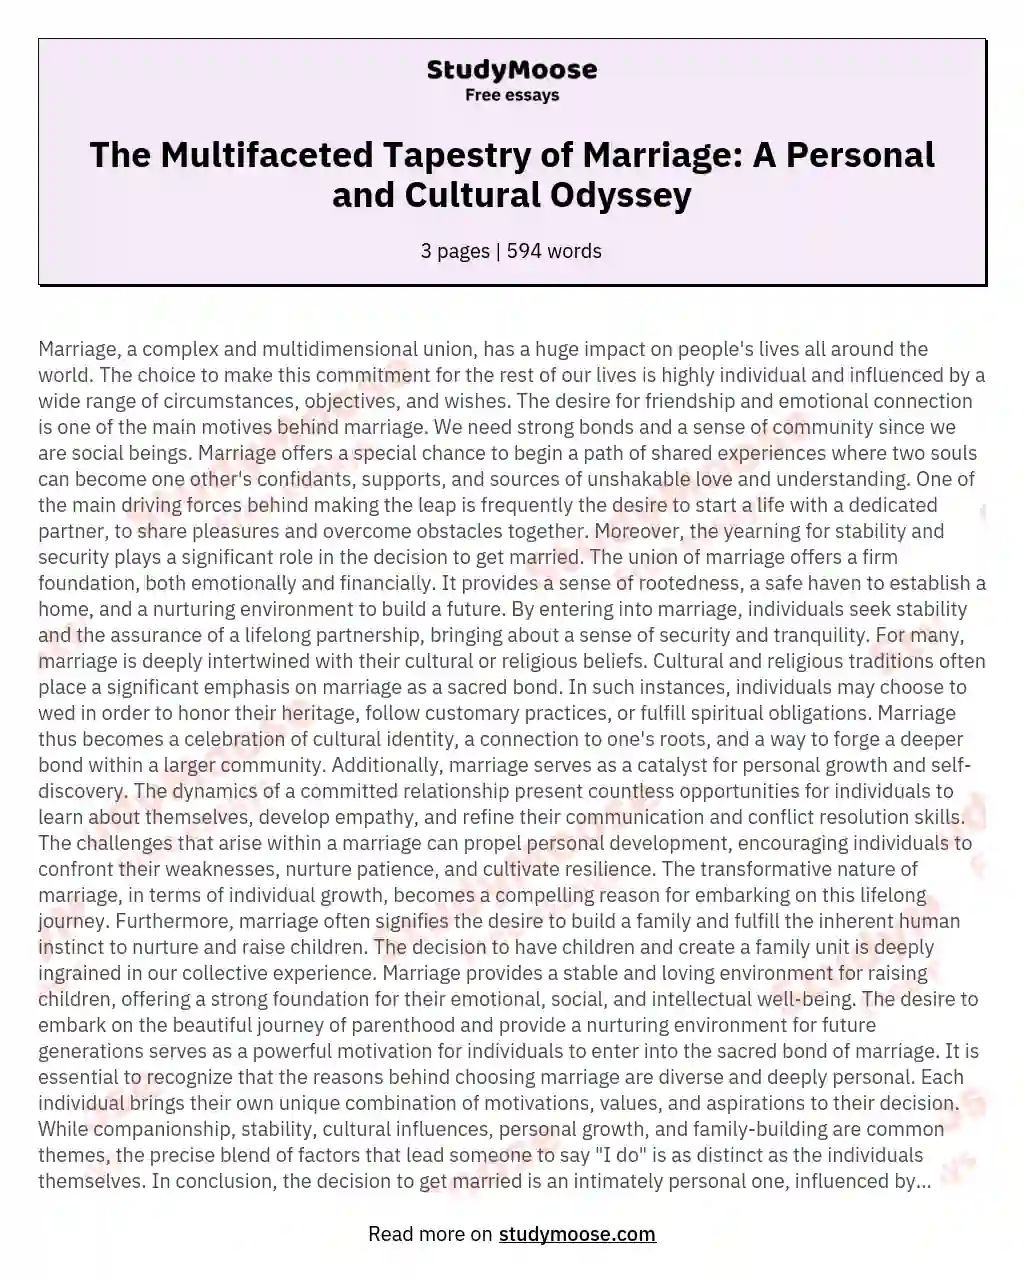 The Multifaceted Tapestry of Marriage: A Personal and Cultural Odyssey essay